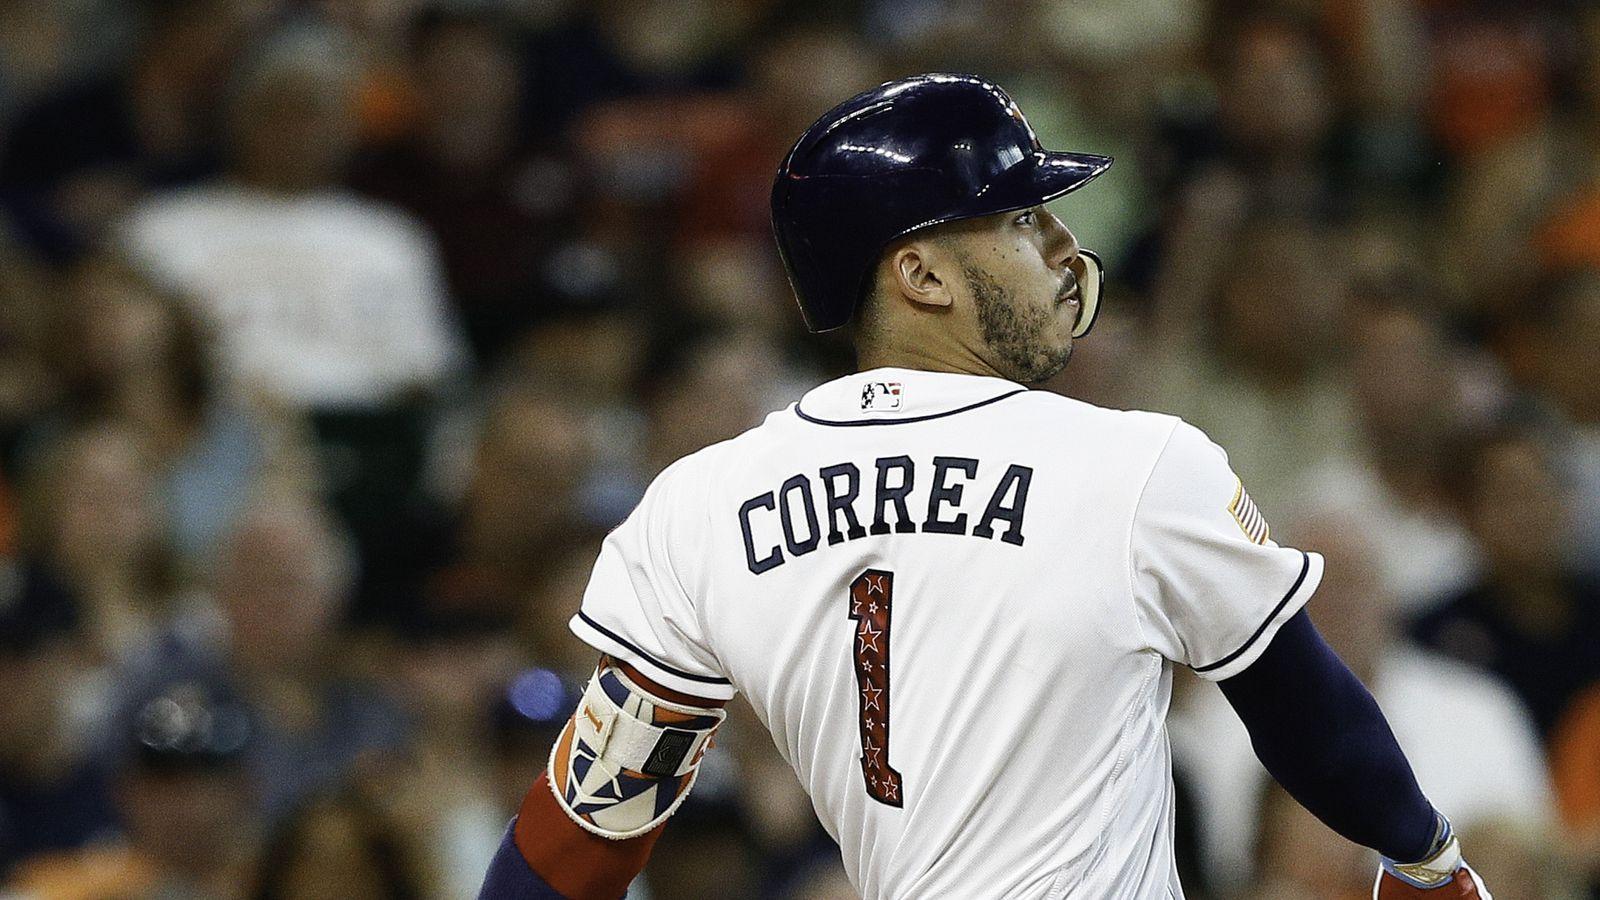 Carlos Correa has reached another level the Box Score